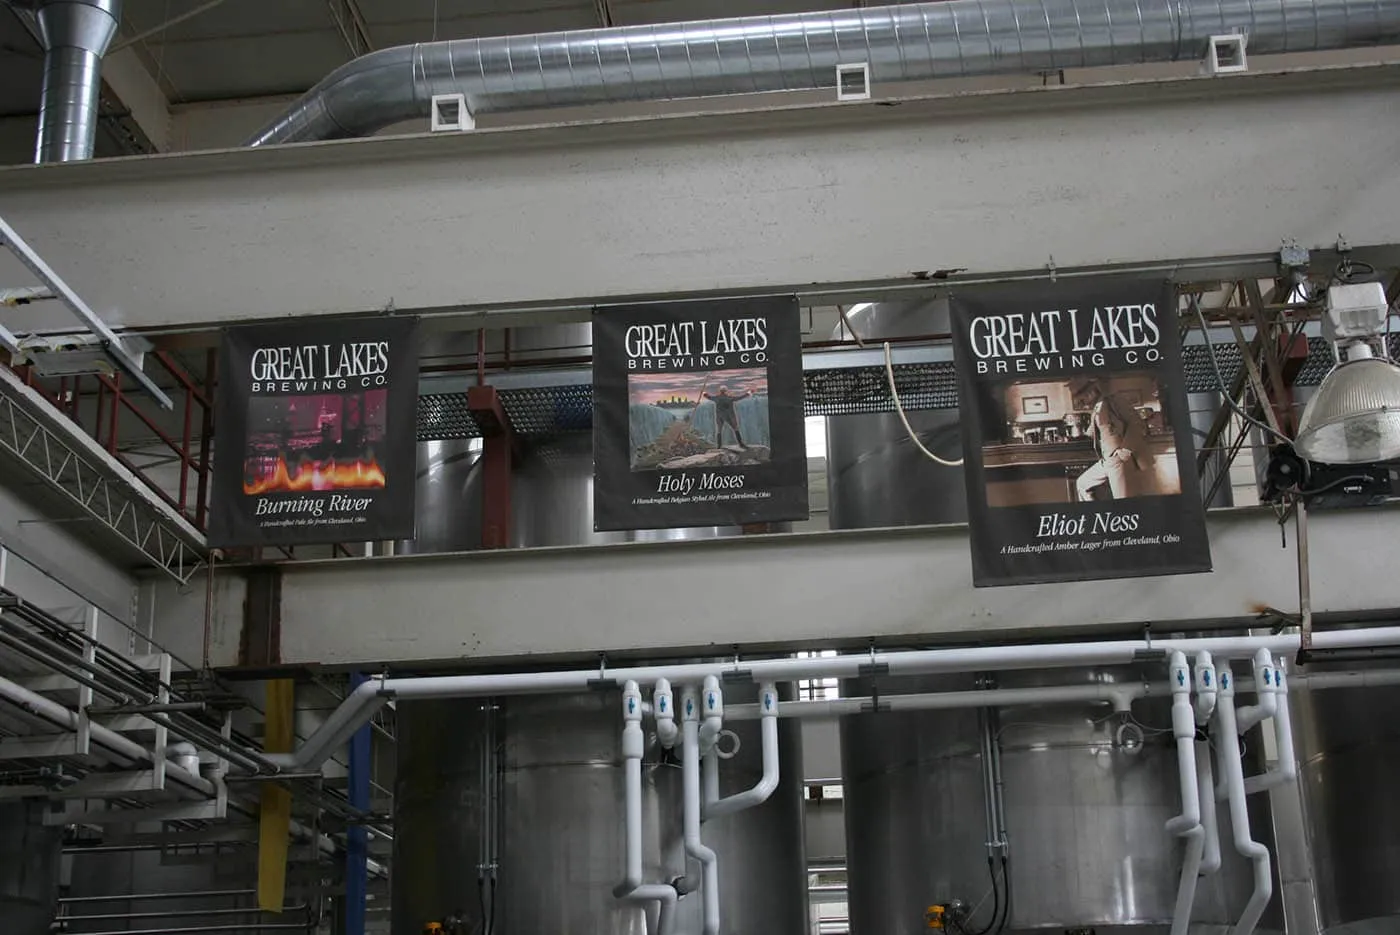 Great Lakes Brewing Company in Cleveland, Ohio